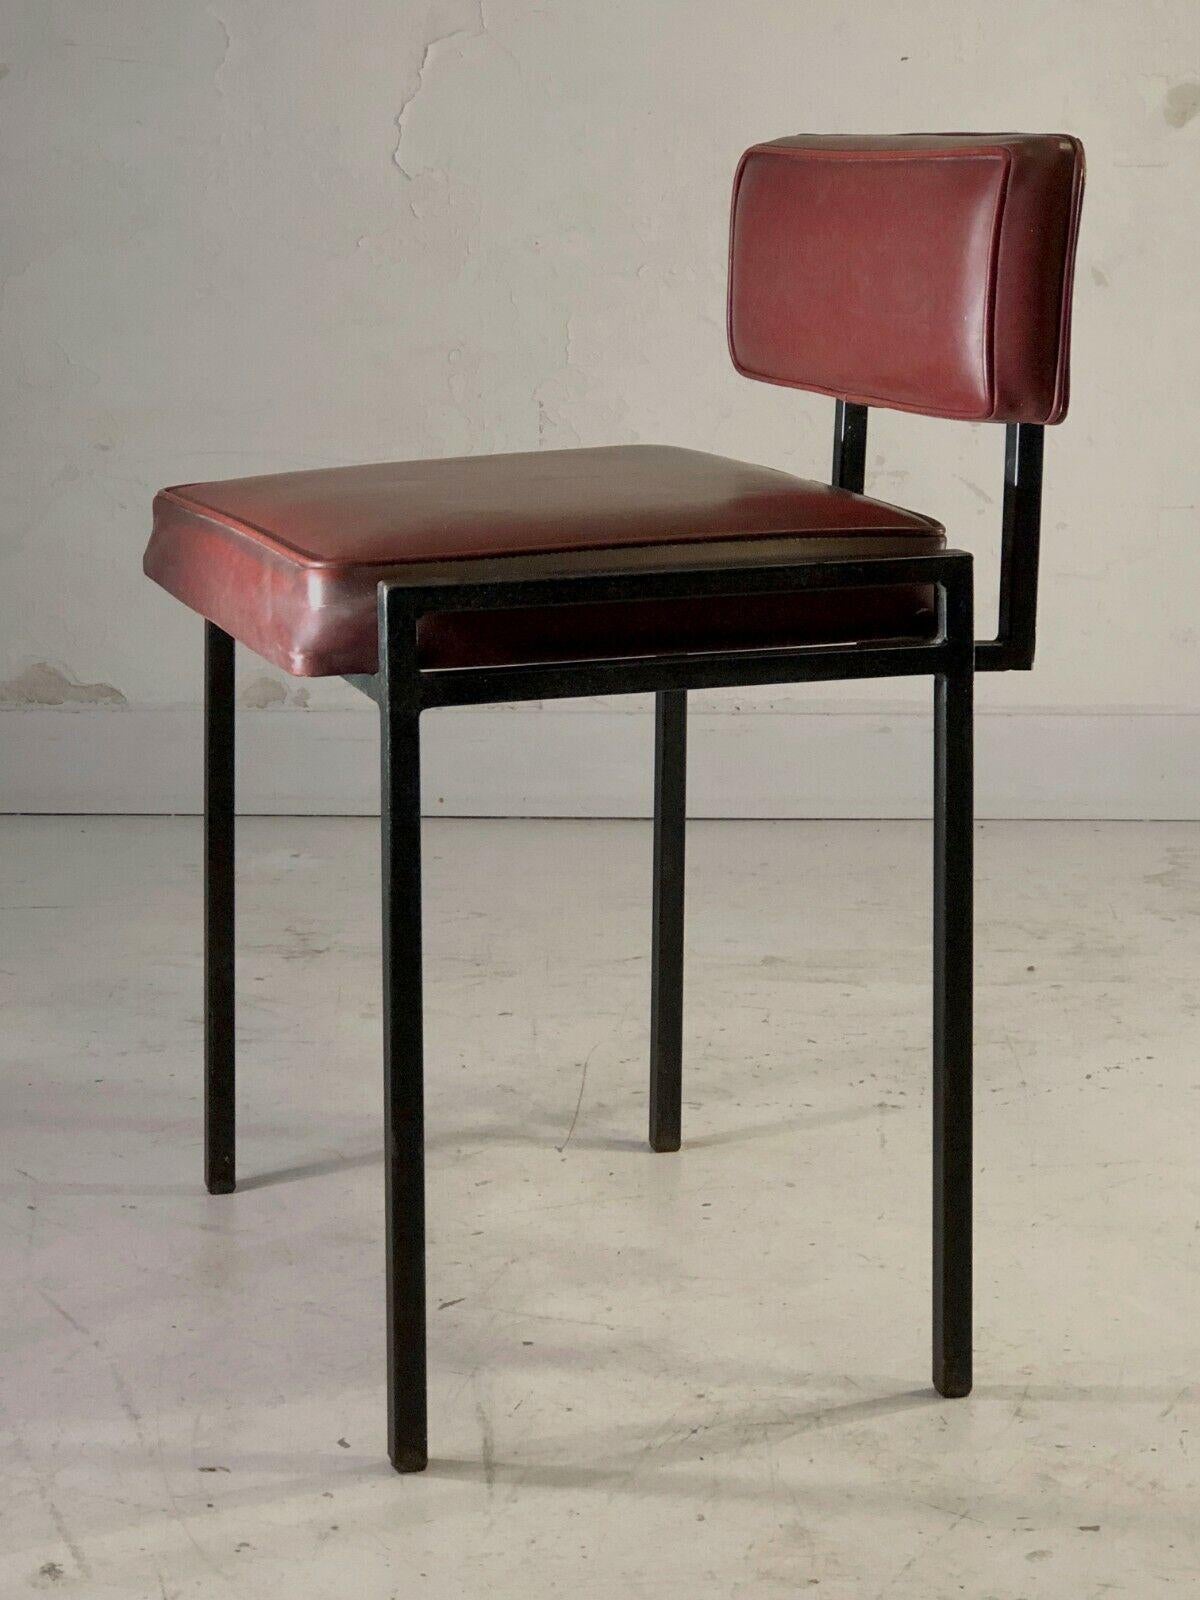 Faux Leather An Architectural RADICAL MODERNIST CHAIR, PHILIPPON-LECOQ Style, France 1950